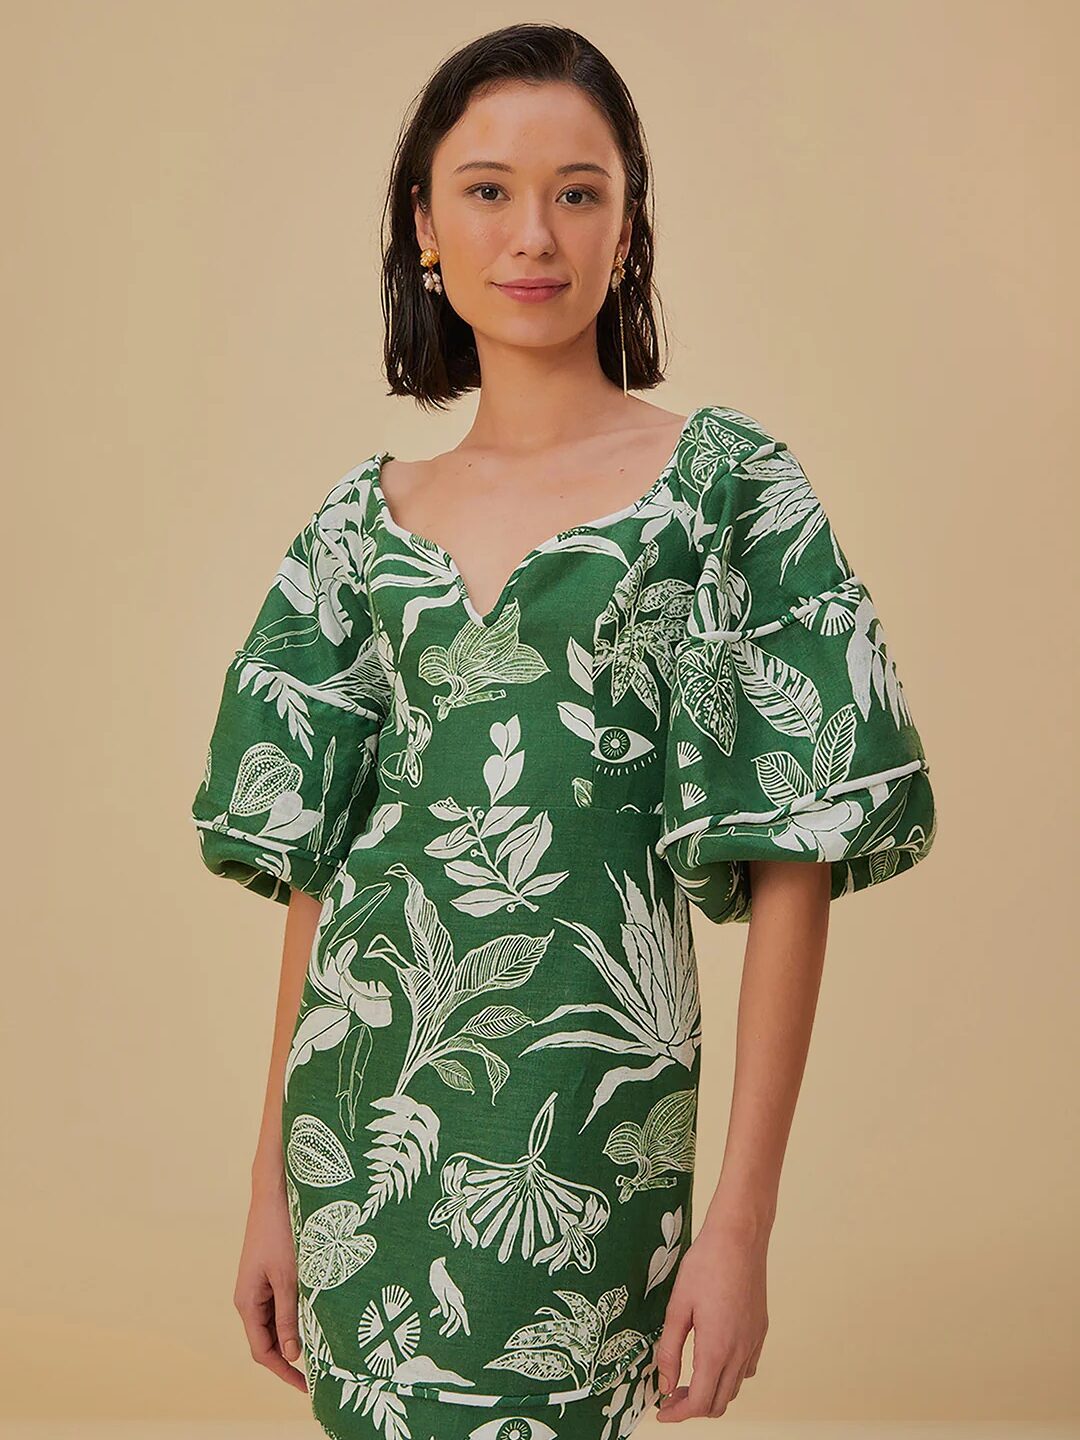 A woman wearing a green and white tropical print dress, standing confidently against a beige background.